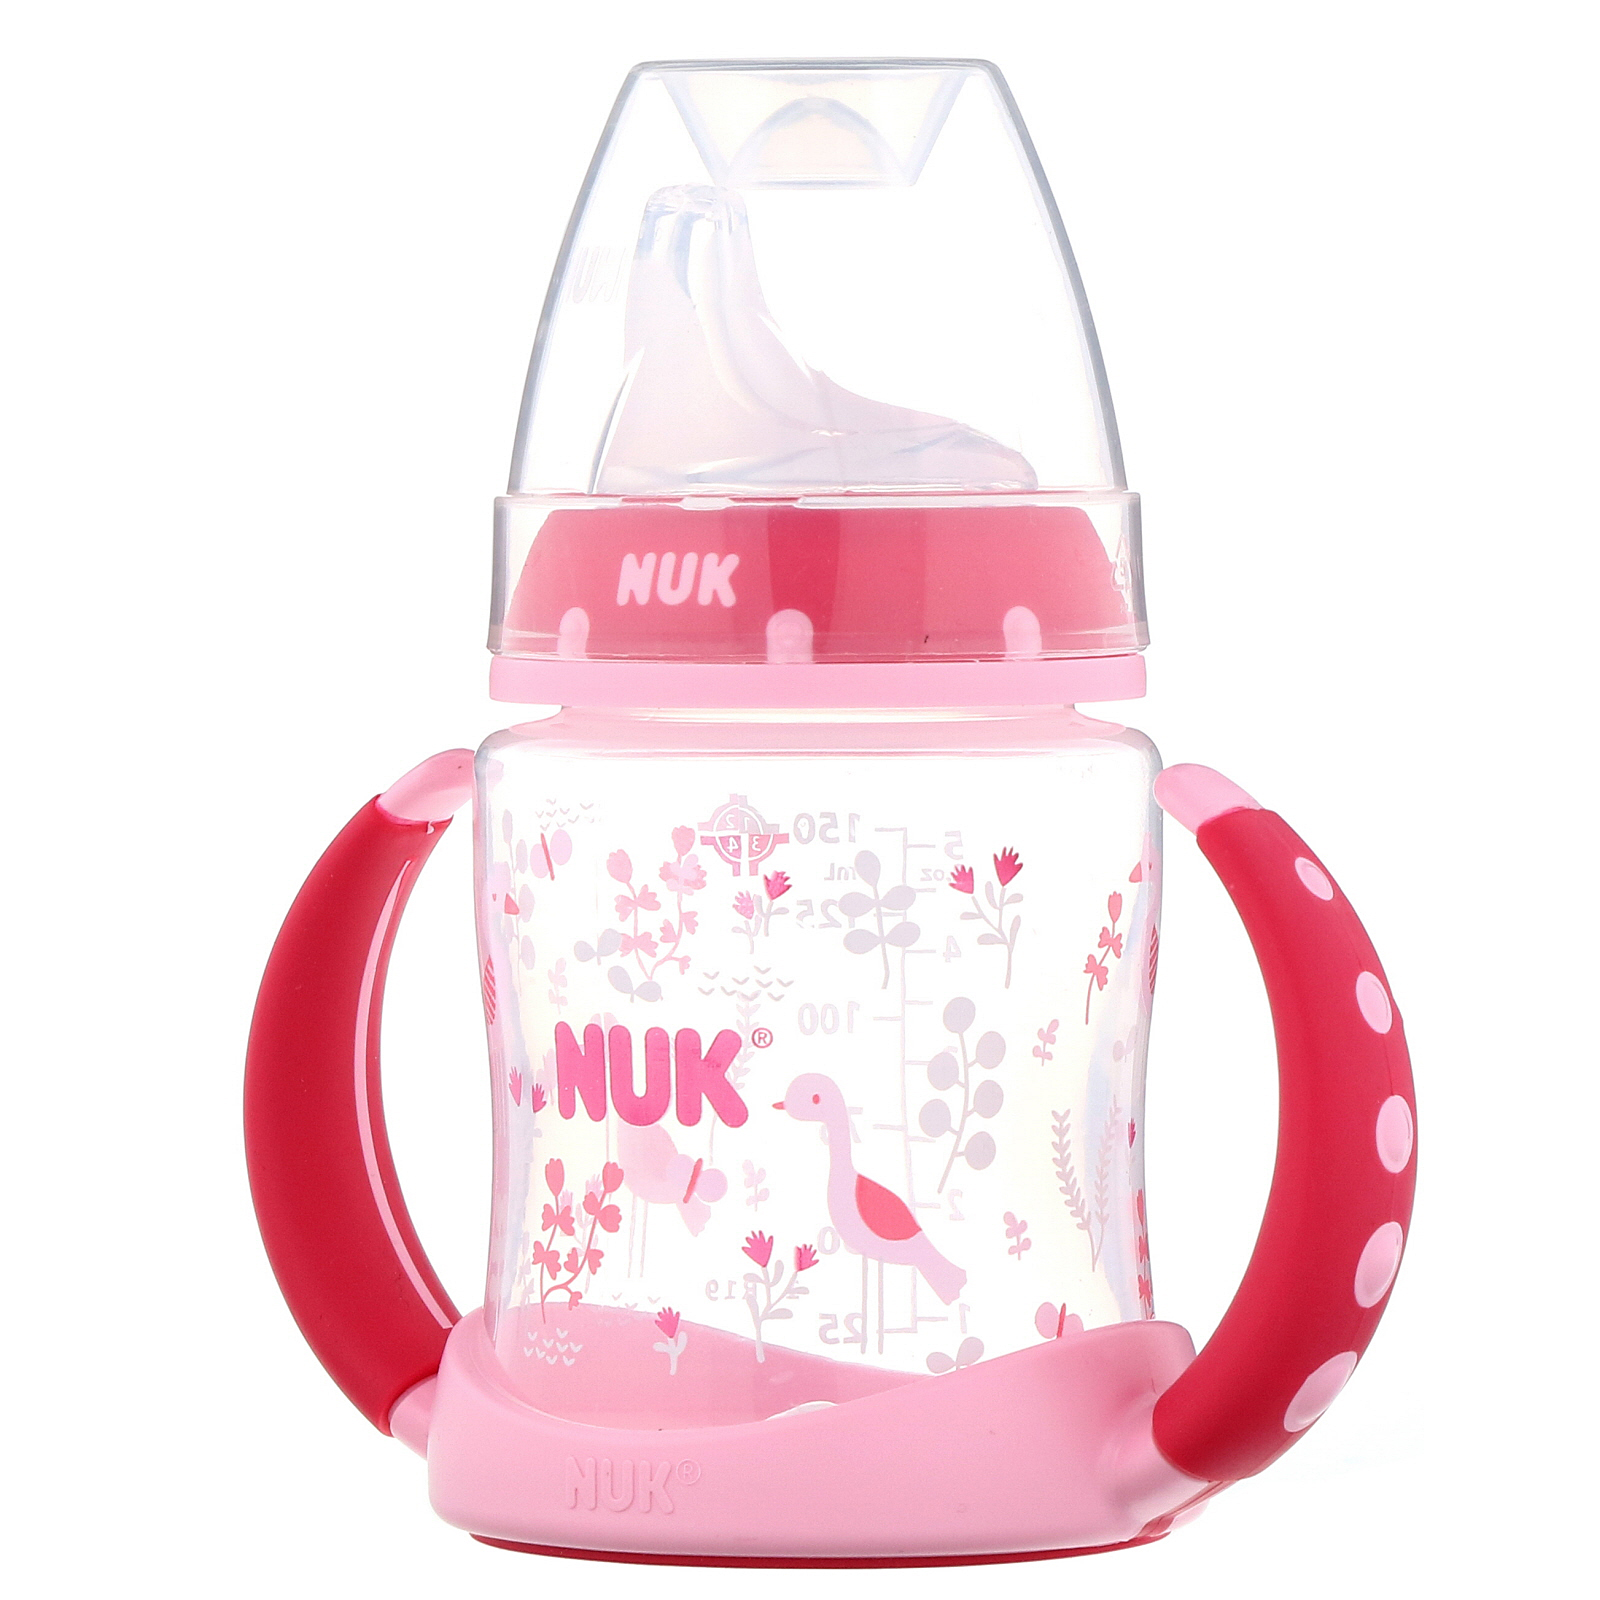 Nuk Learner Cup 6 Months Pink 1 Cup 5 Oz 150 Ml Iherb,Bearnaise Sauce Knorr